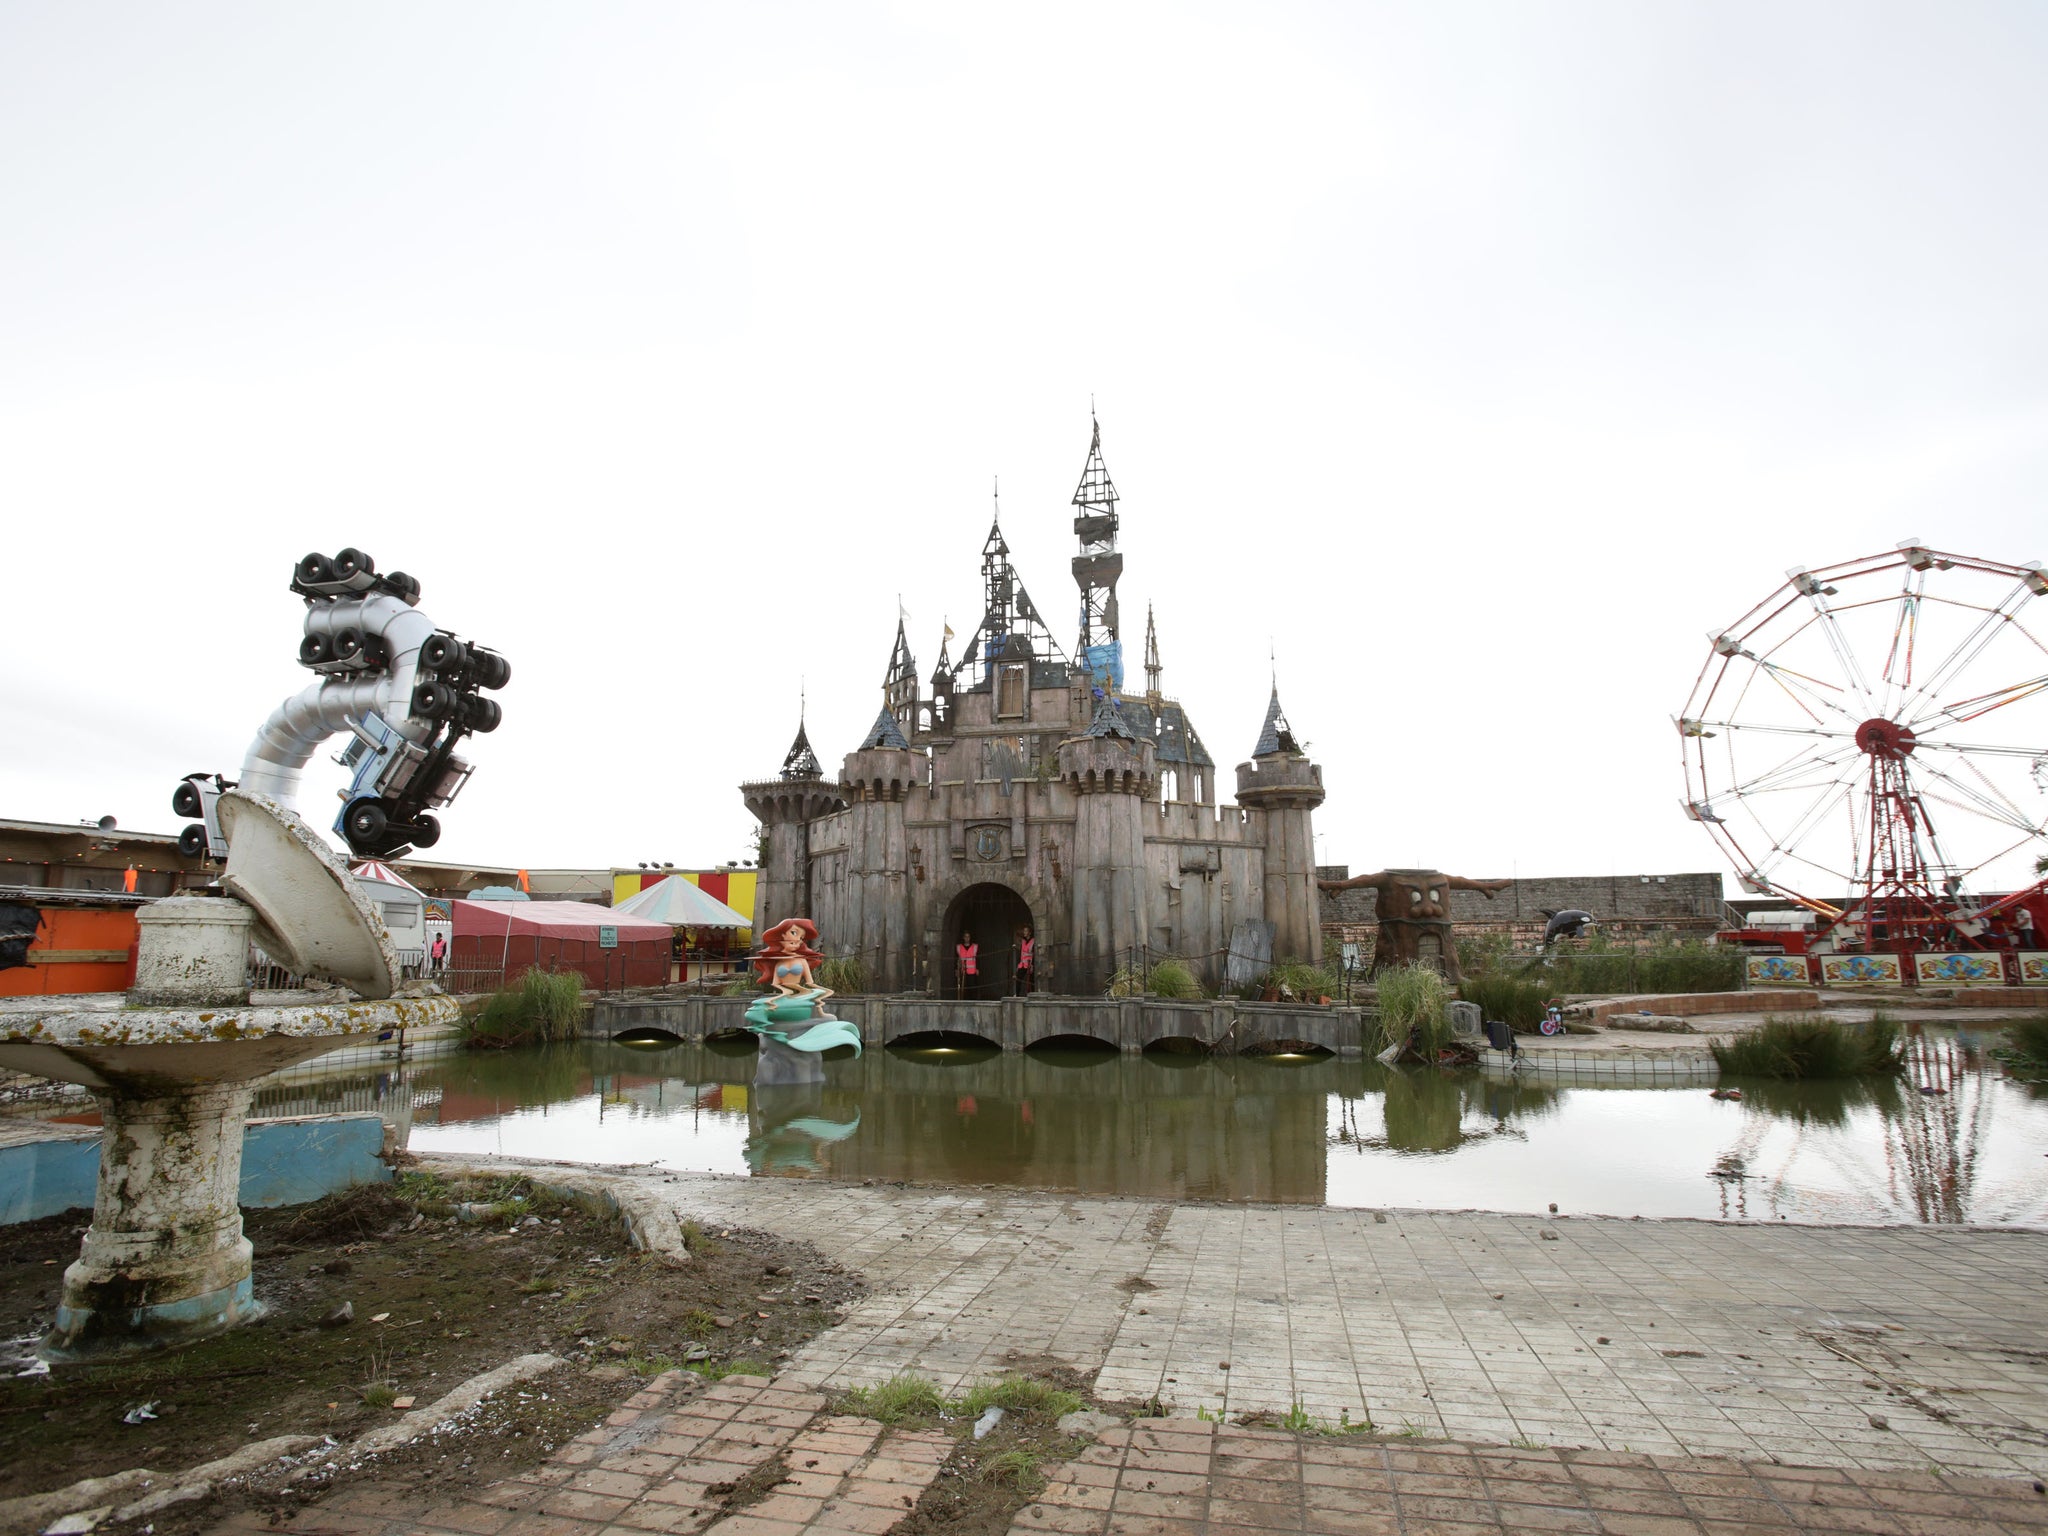 A fairytale castle which forms part of Dismaland - Bemusement Park, Banksy's biggest show to date, in Western-super-Mare, Somerset.